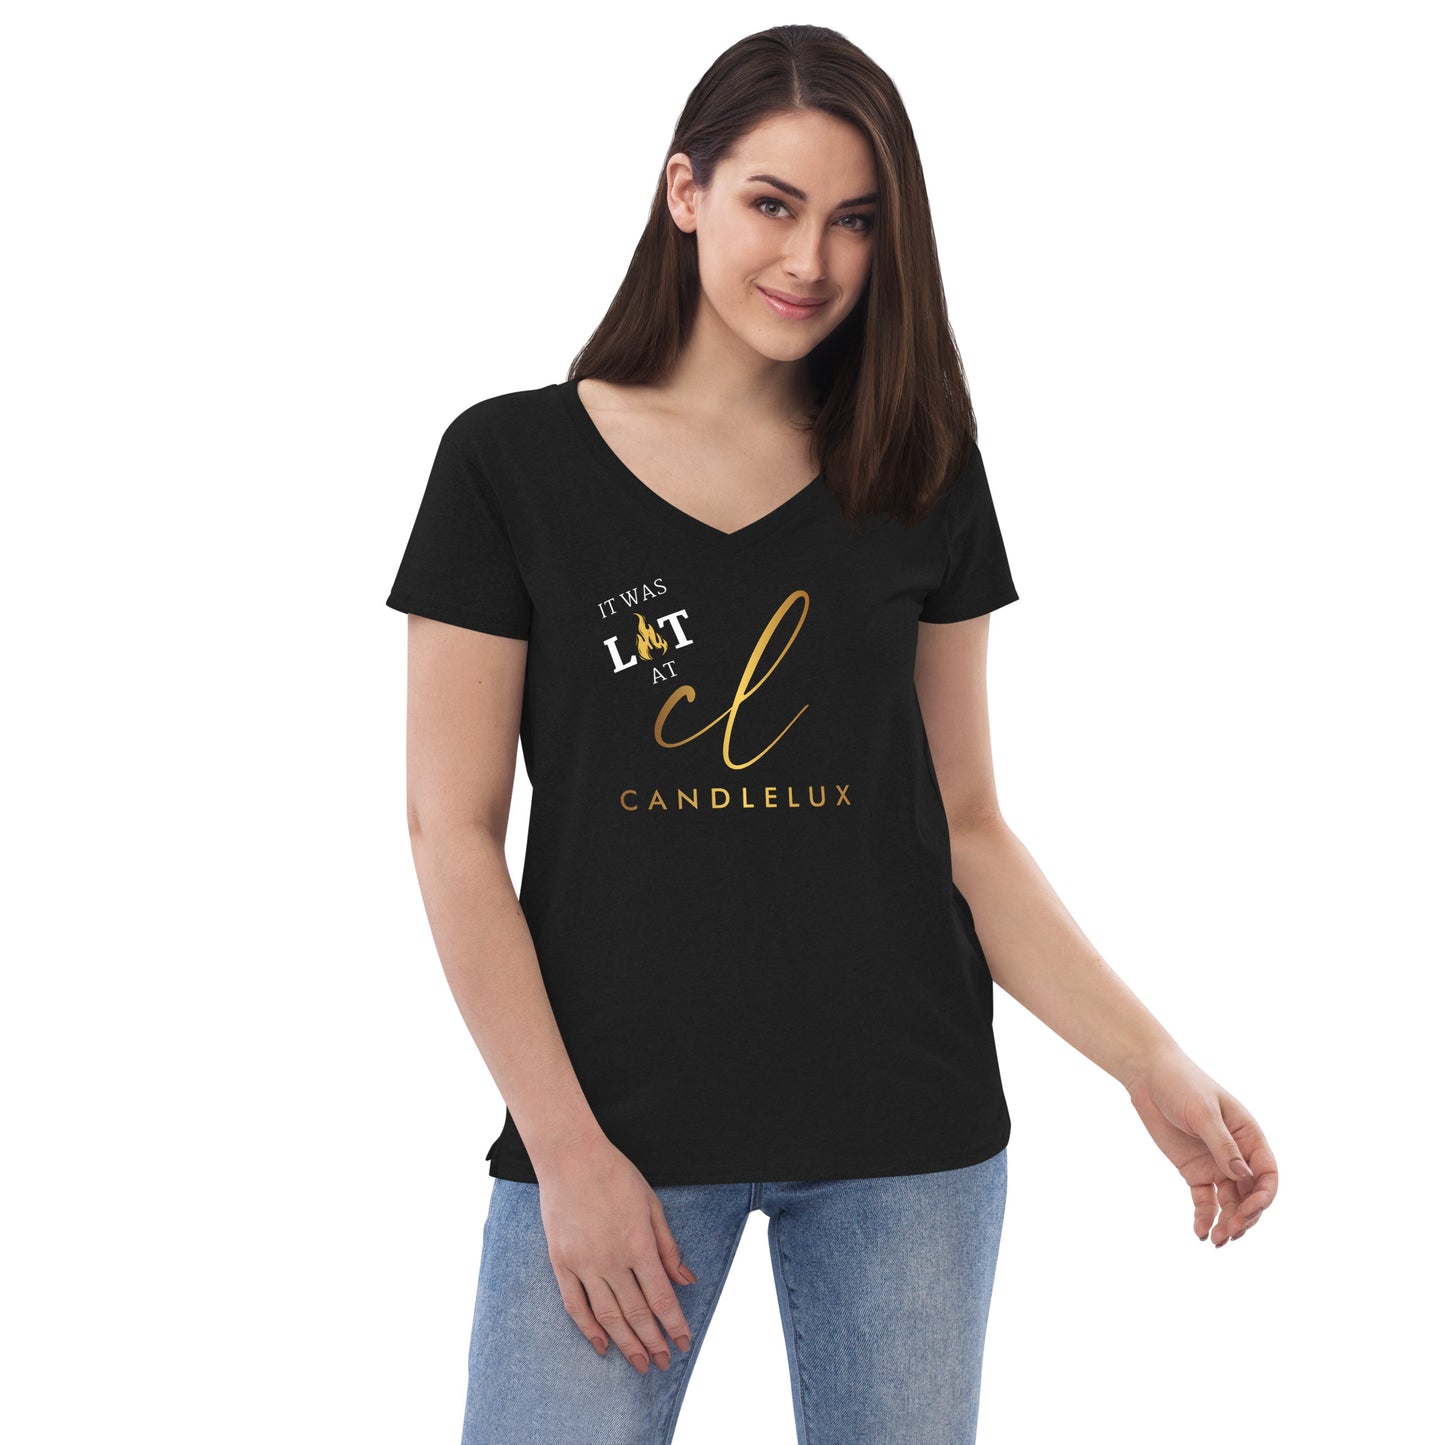 IT WAS LIT - Women’s recycled cotton v-neck t-shirt